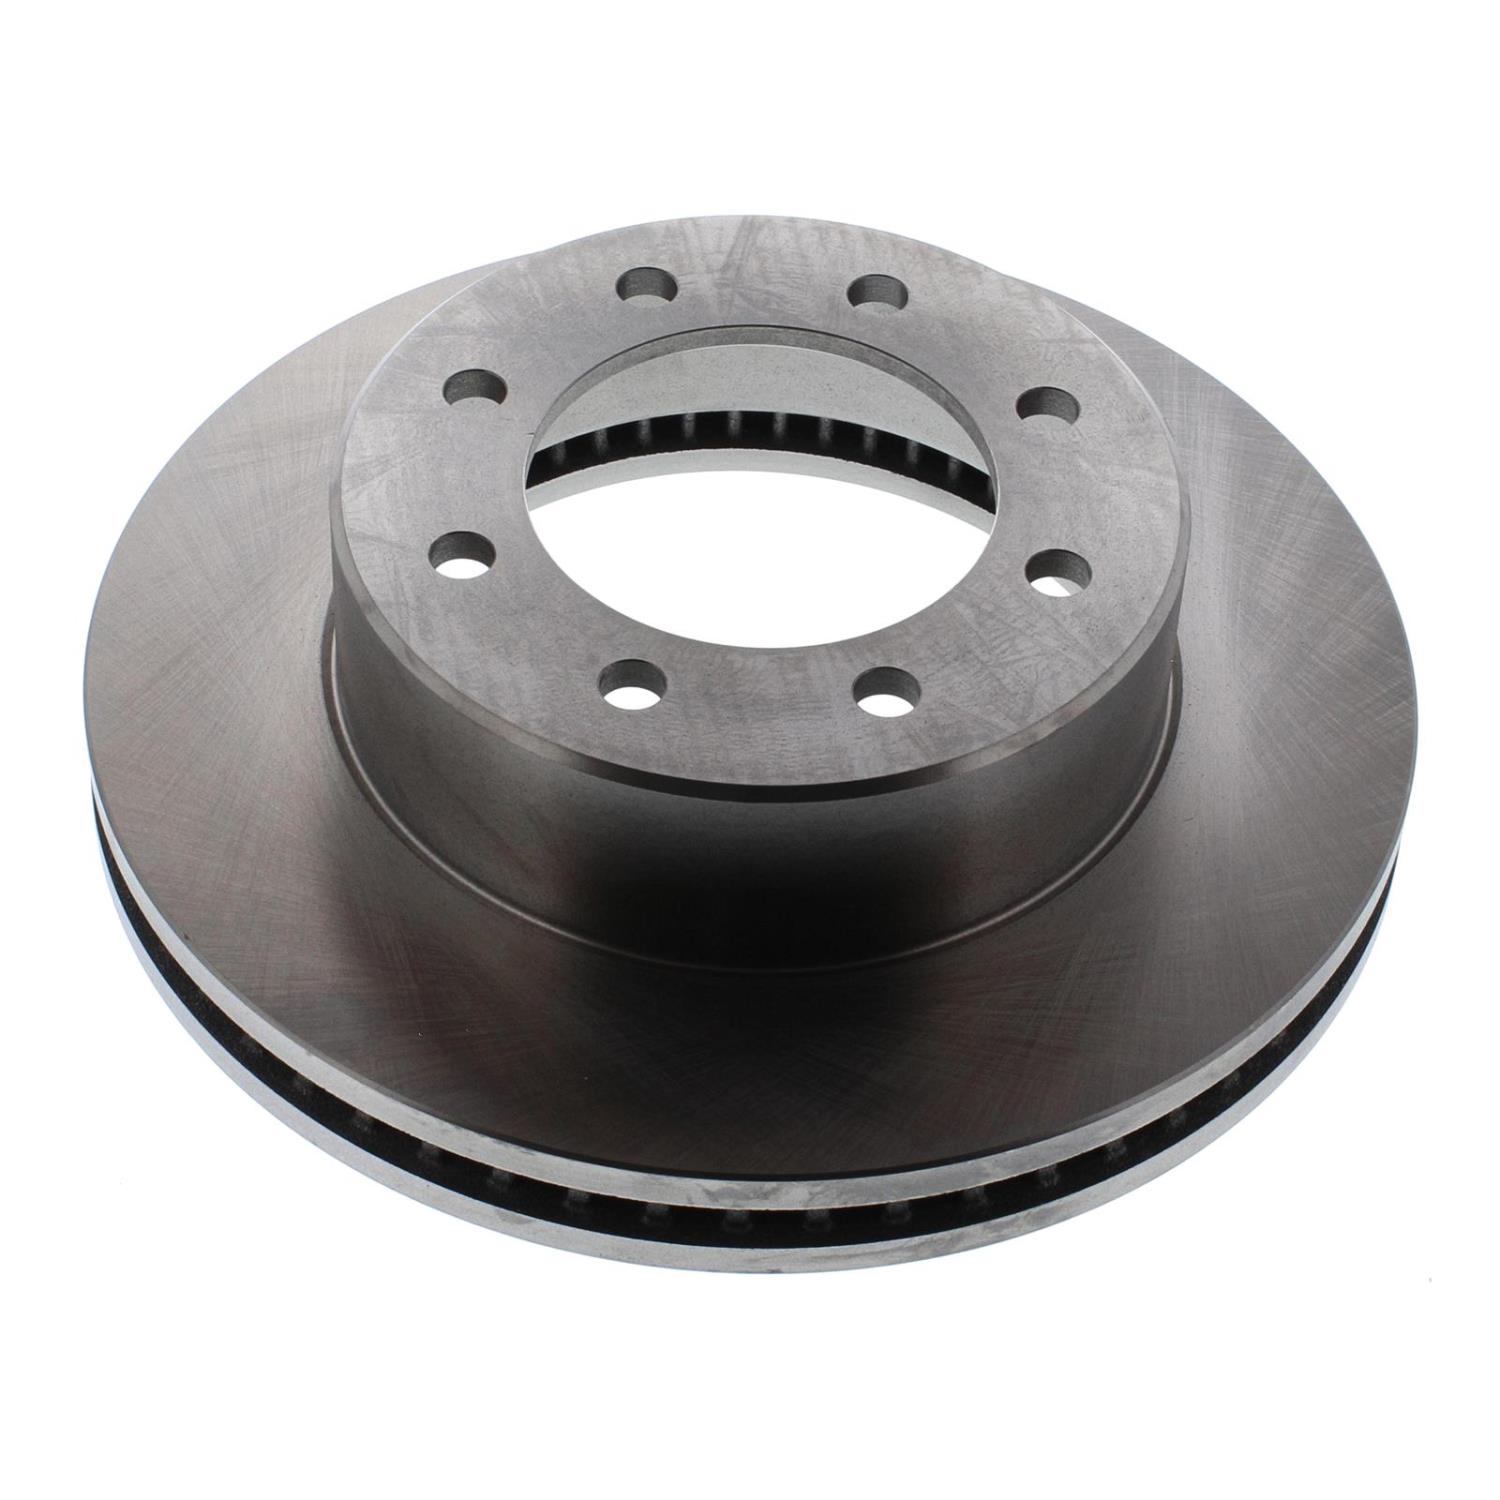 Autospecialty OE Replacement Brake Rotor for Late Model